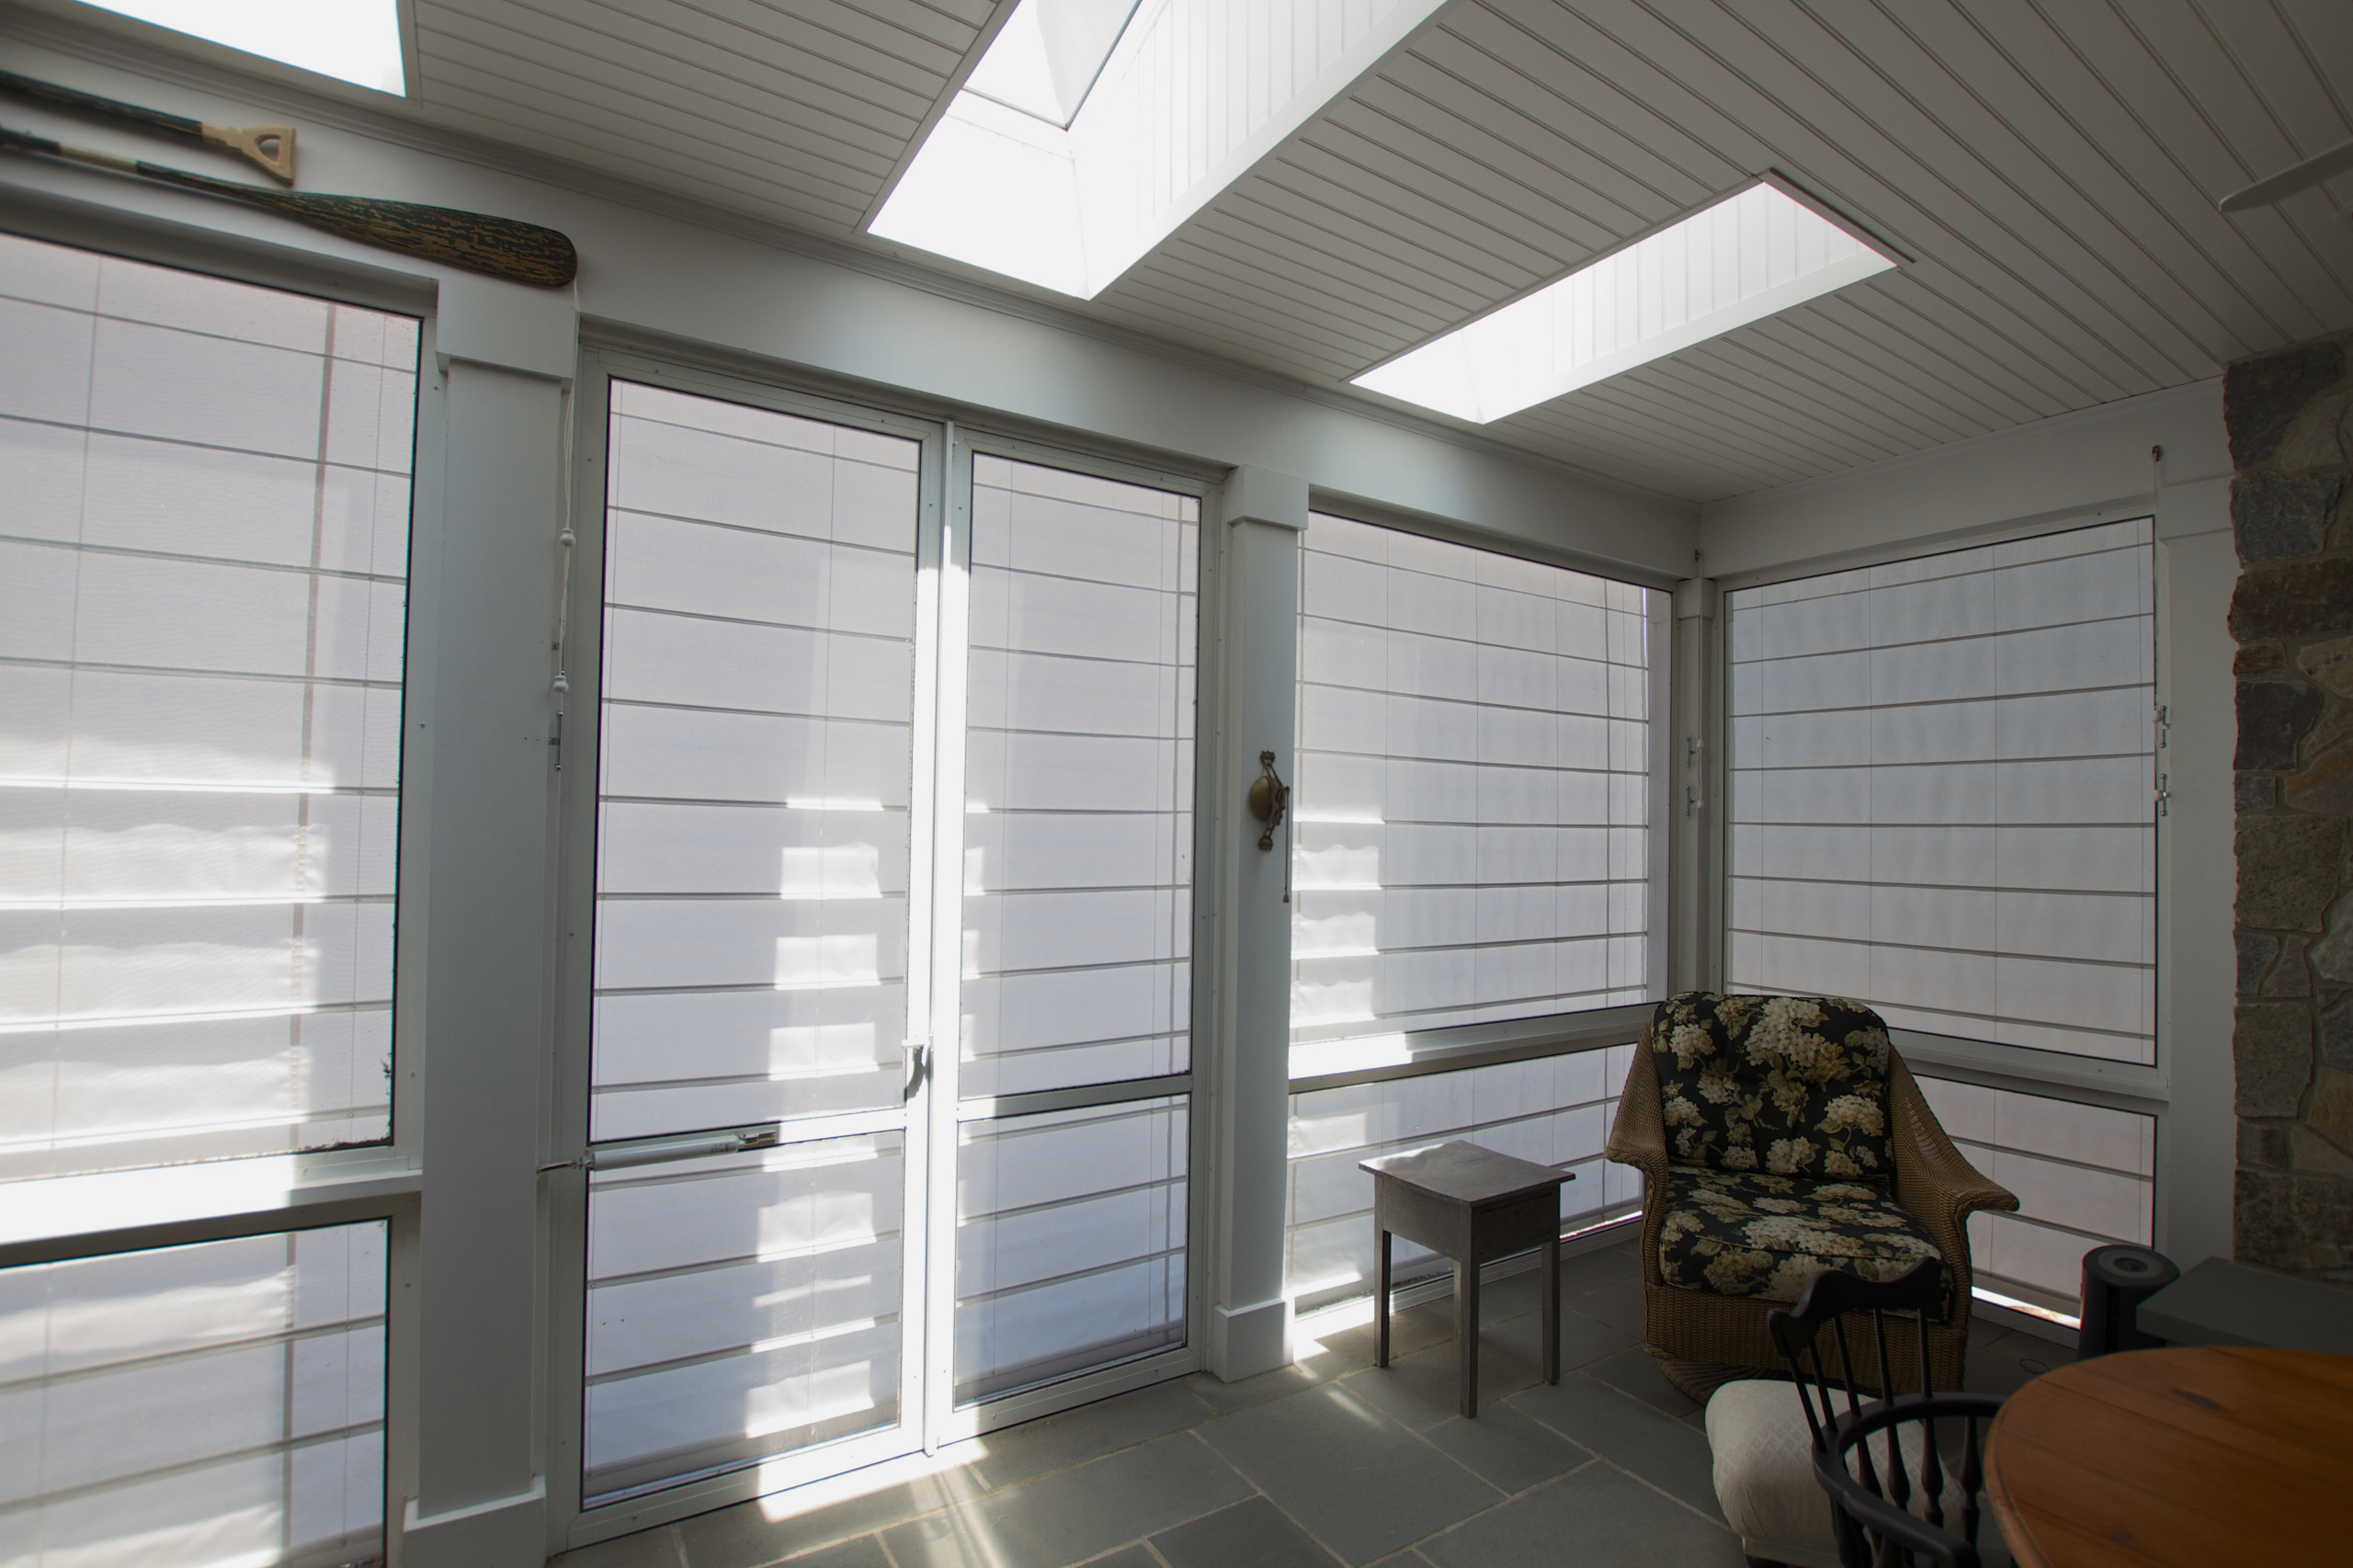 Screen porch shades provide protection, privacy and security.